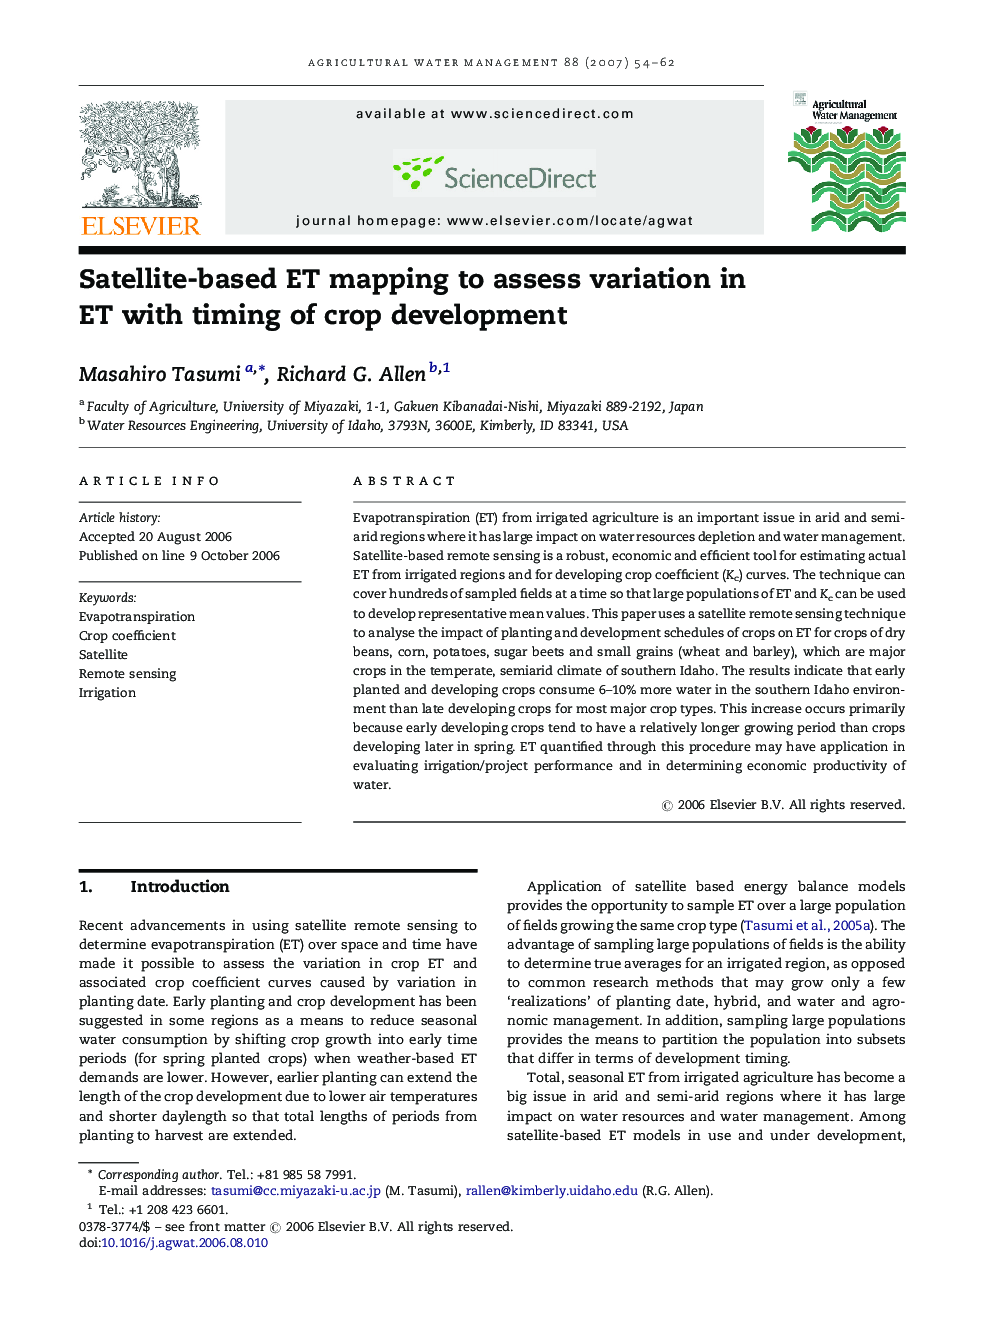 Satellite-based ET mapping to assess variation in ET with timing of crop development